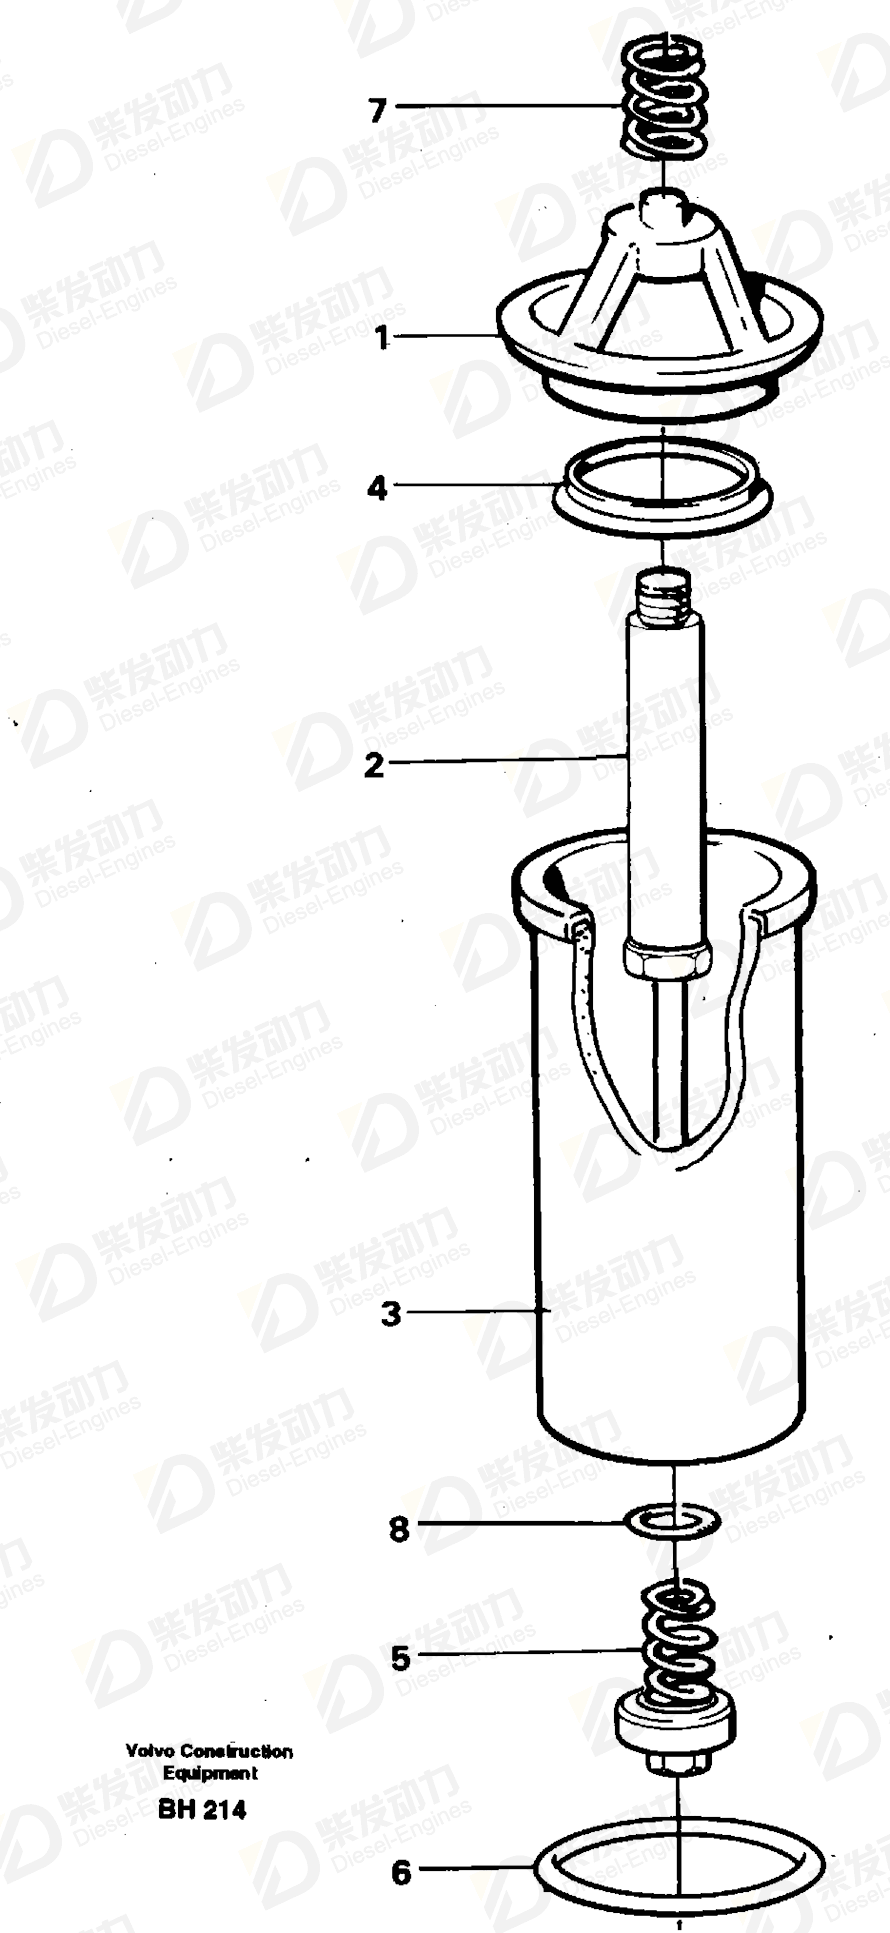 VOLVO Filter Retainer 11026955 Drawing